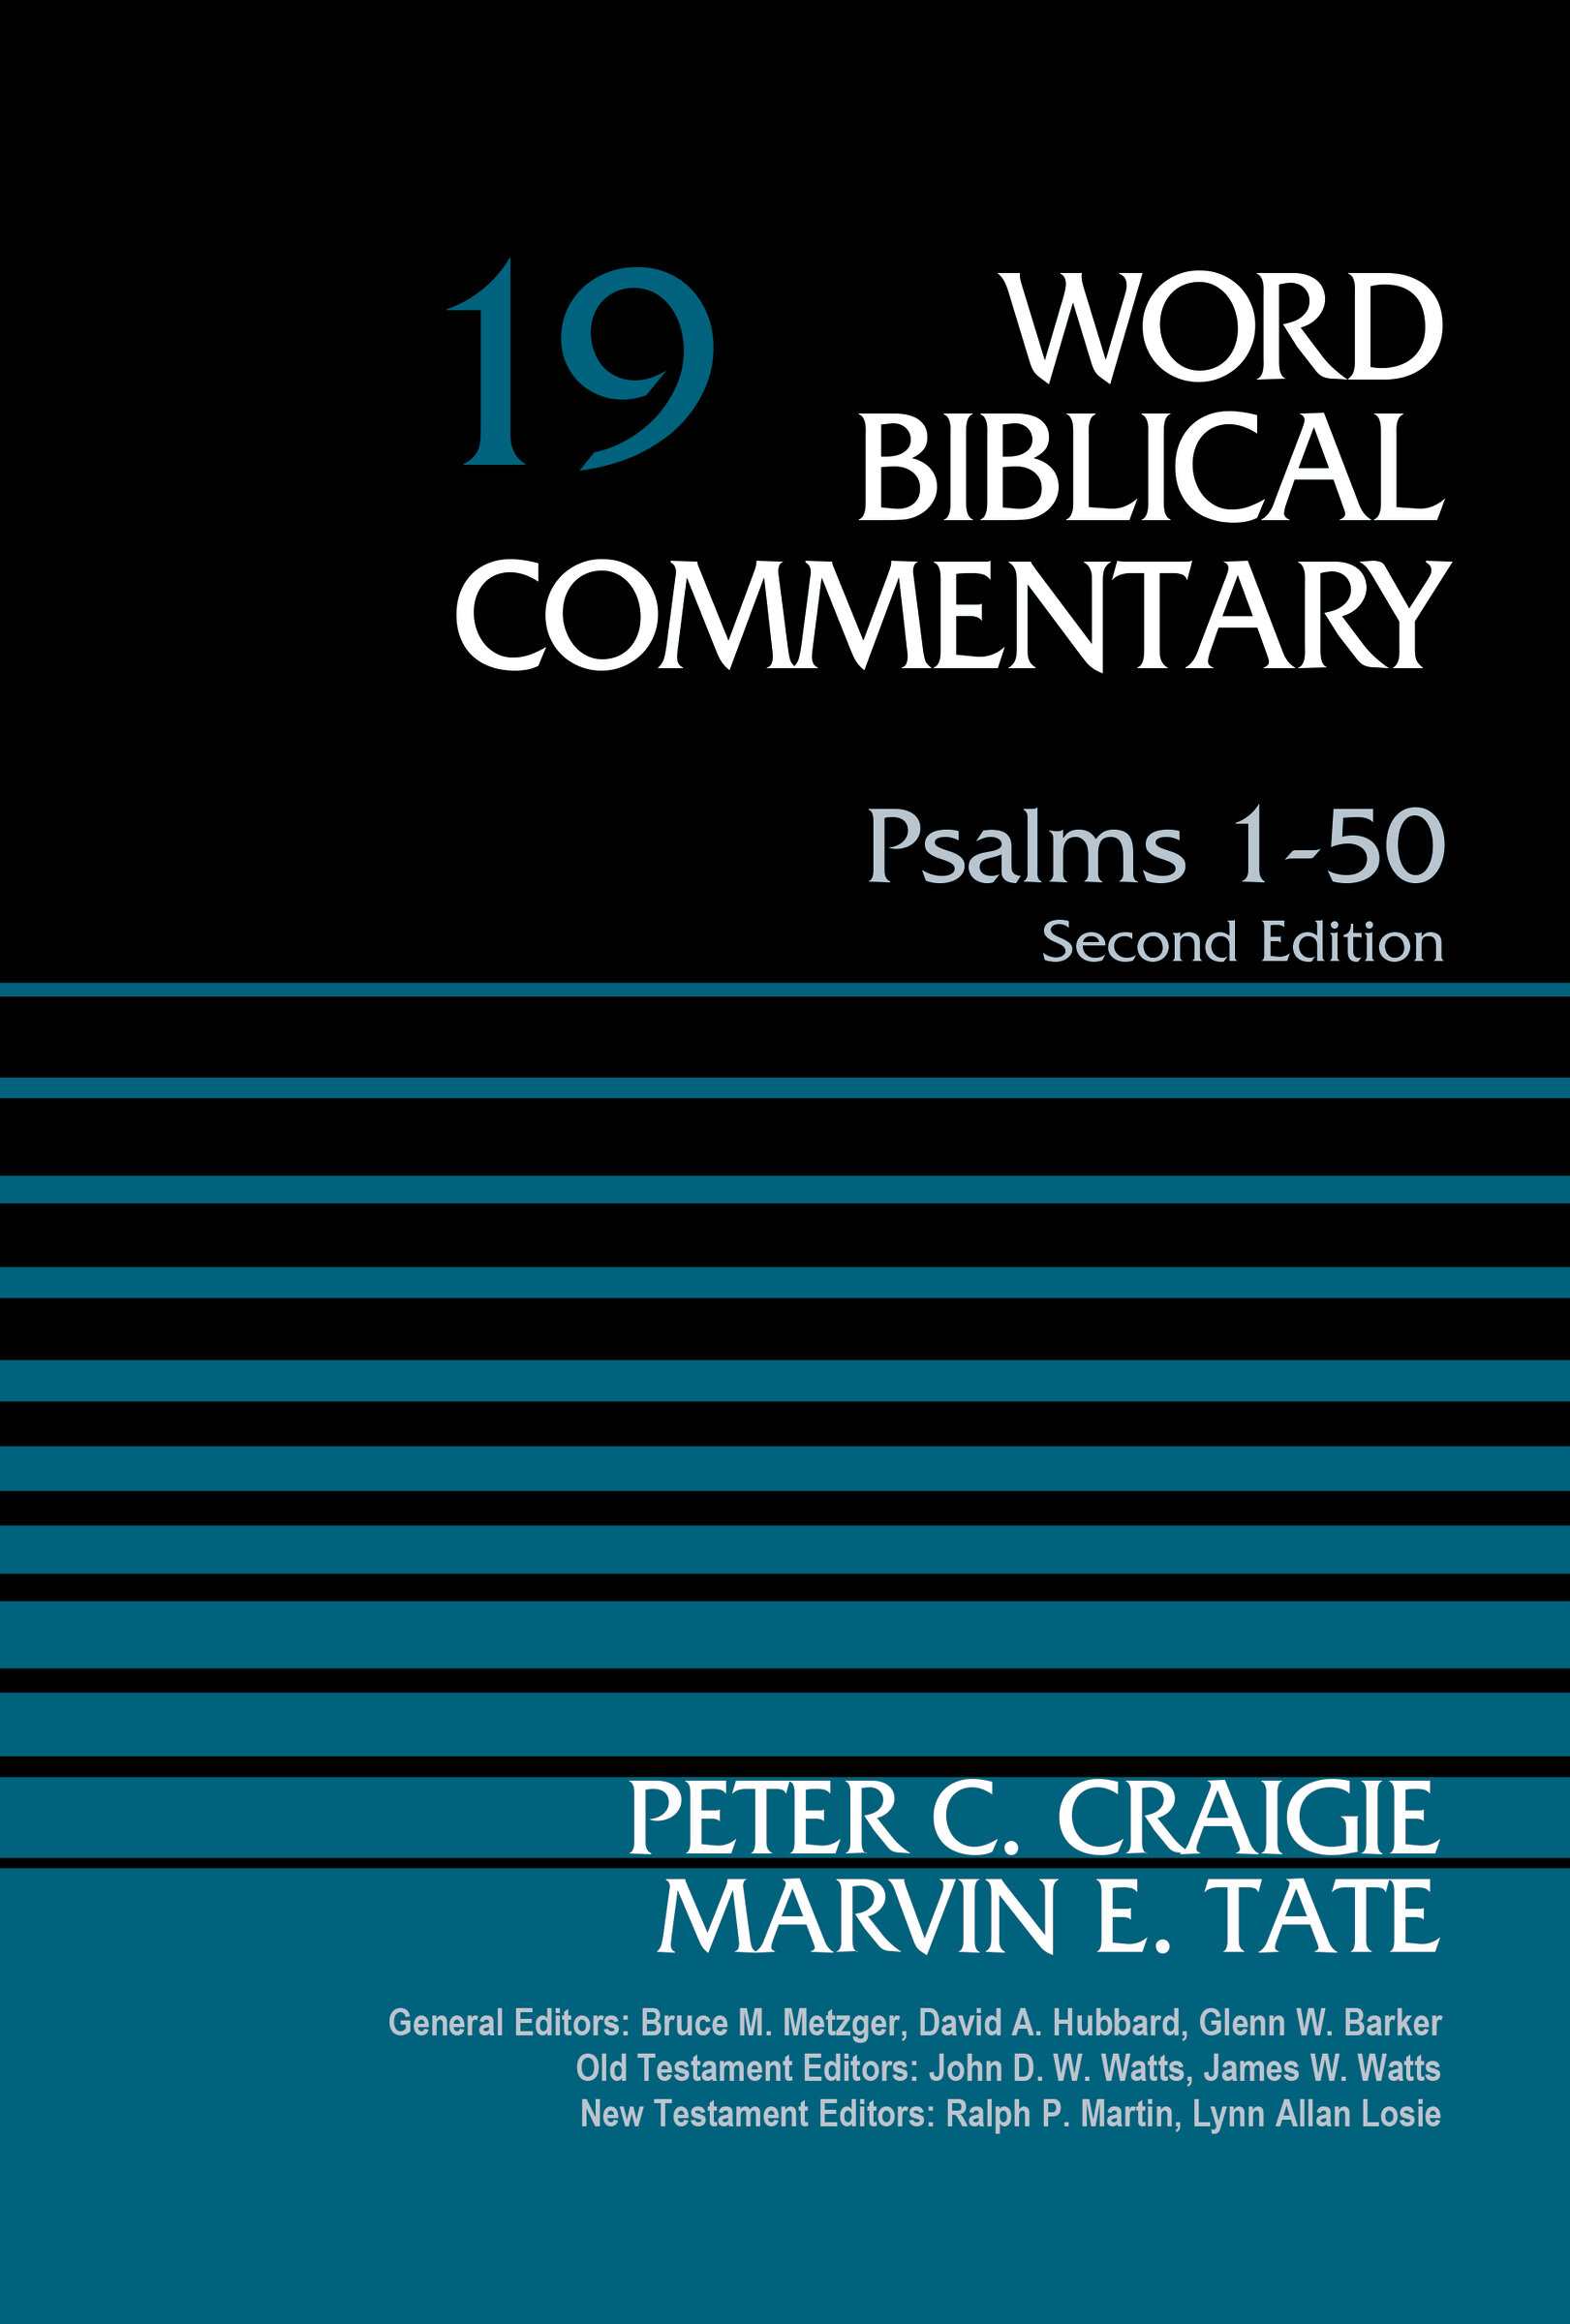 Psalms 1–50, Second Edition (Word Biblical Commentary, Volume 19 | WBC)